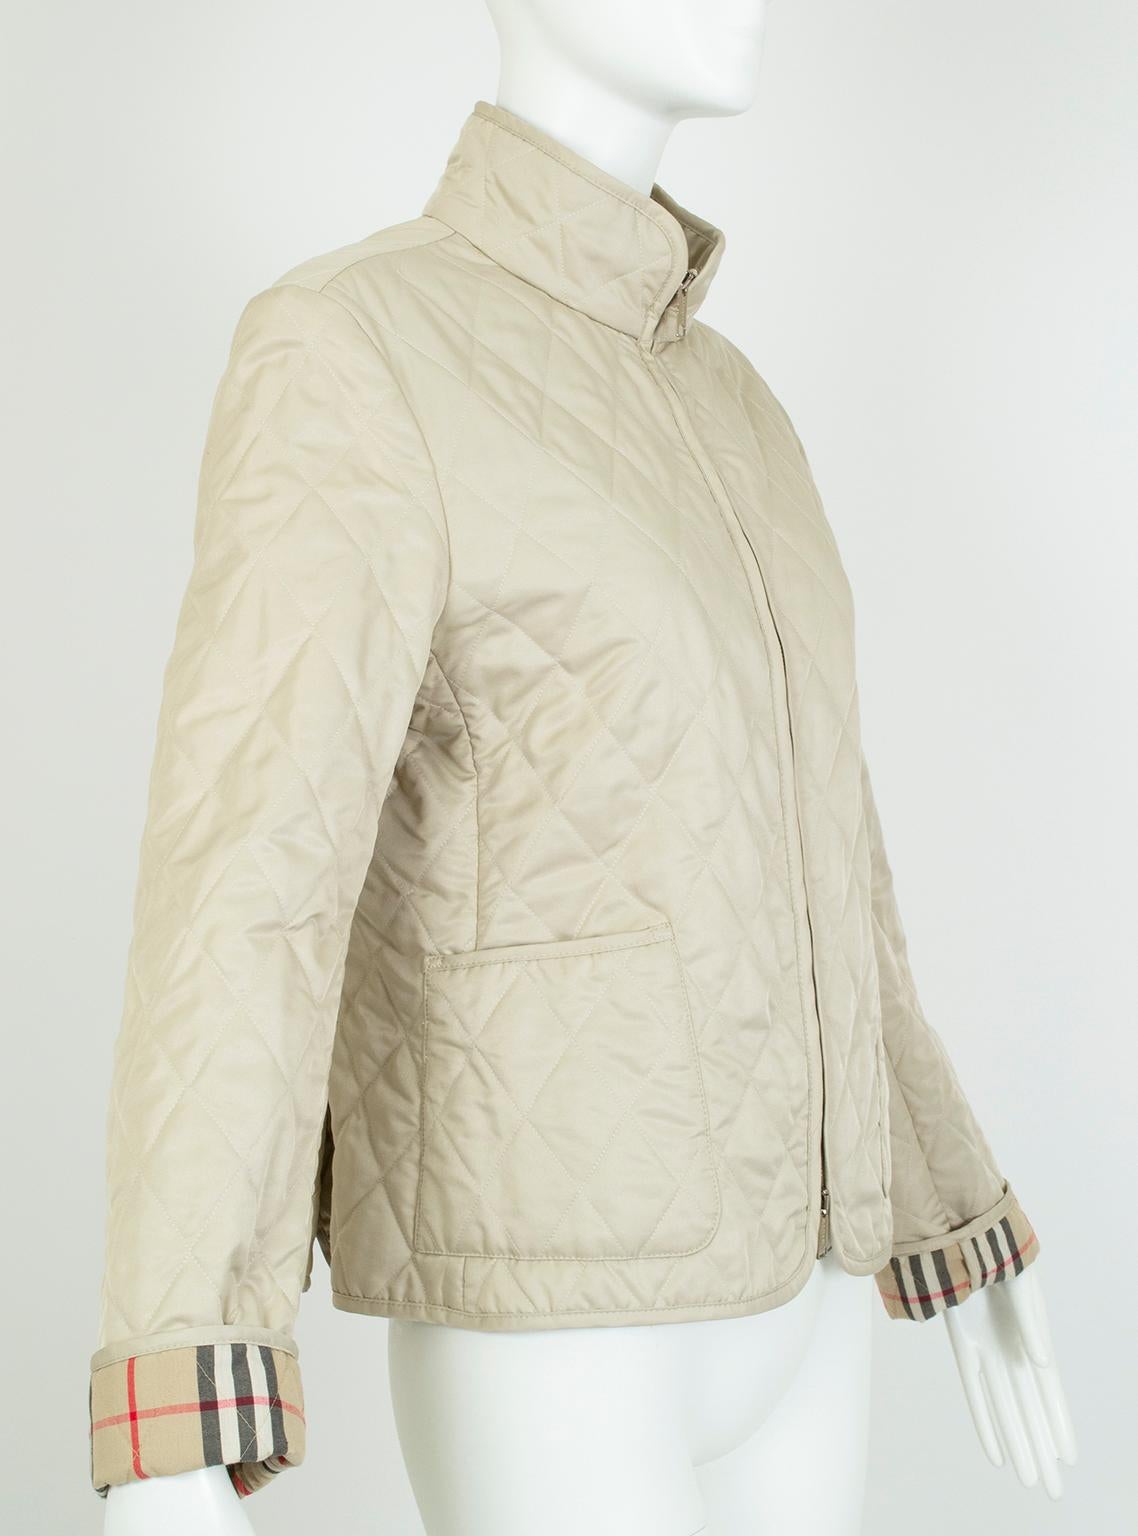 The one and only diamond-quilt field jacket, as much an icon as the double-breasted trench for good reason: it is durable, practical and perennially chic. Its fetching funnel collar imparts an air of elegance, while its quilted microfiber exterior